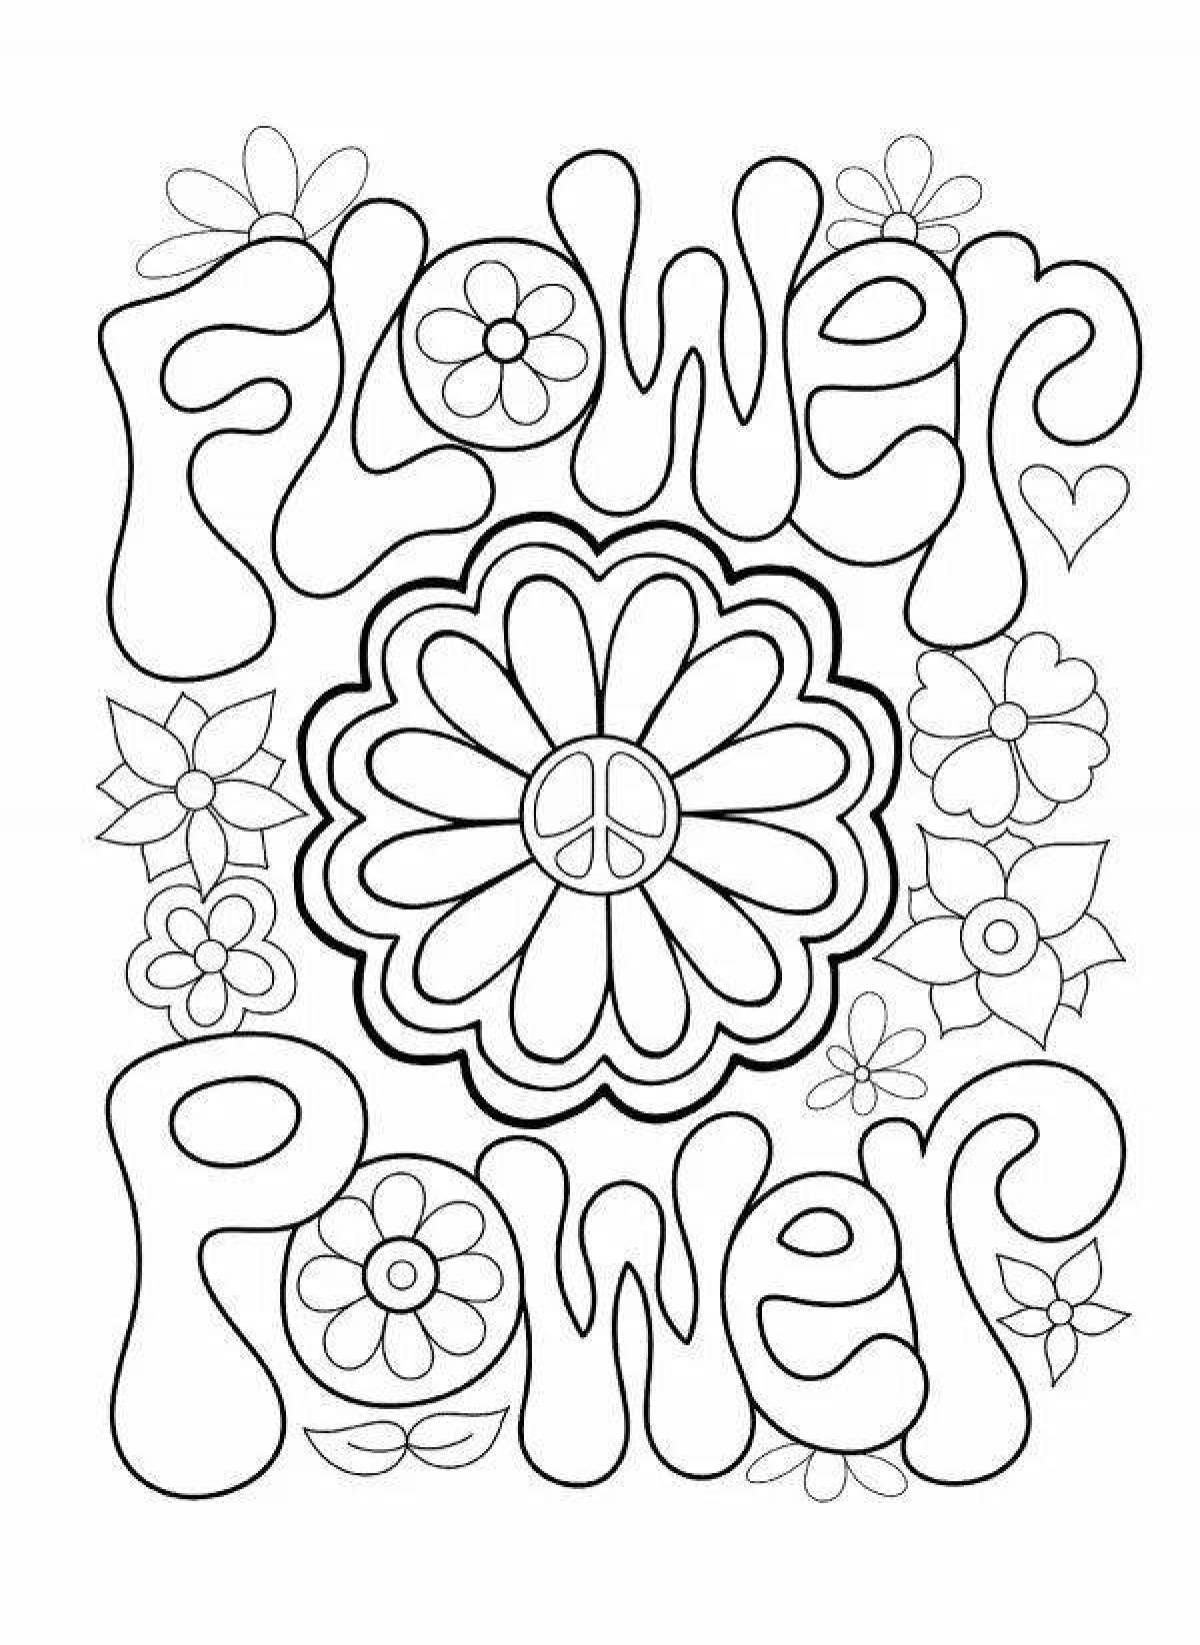 Glitter coloring posters